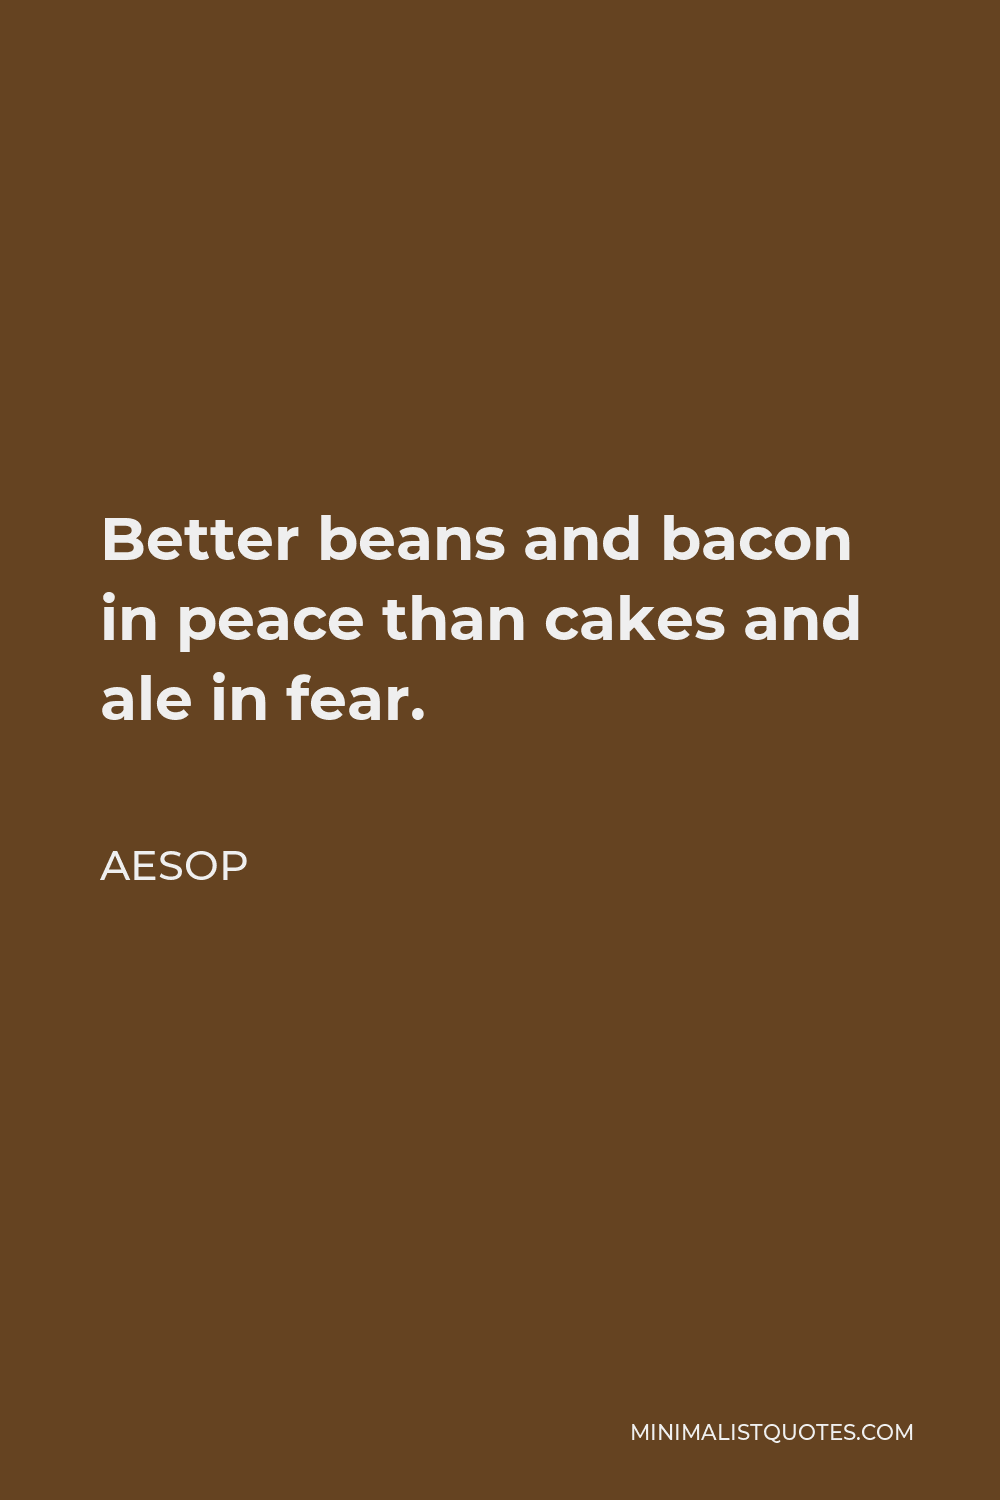 Aesop Quote - Better beans and bacon in peace than cakes and ale in fear.